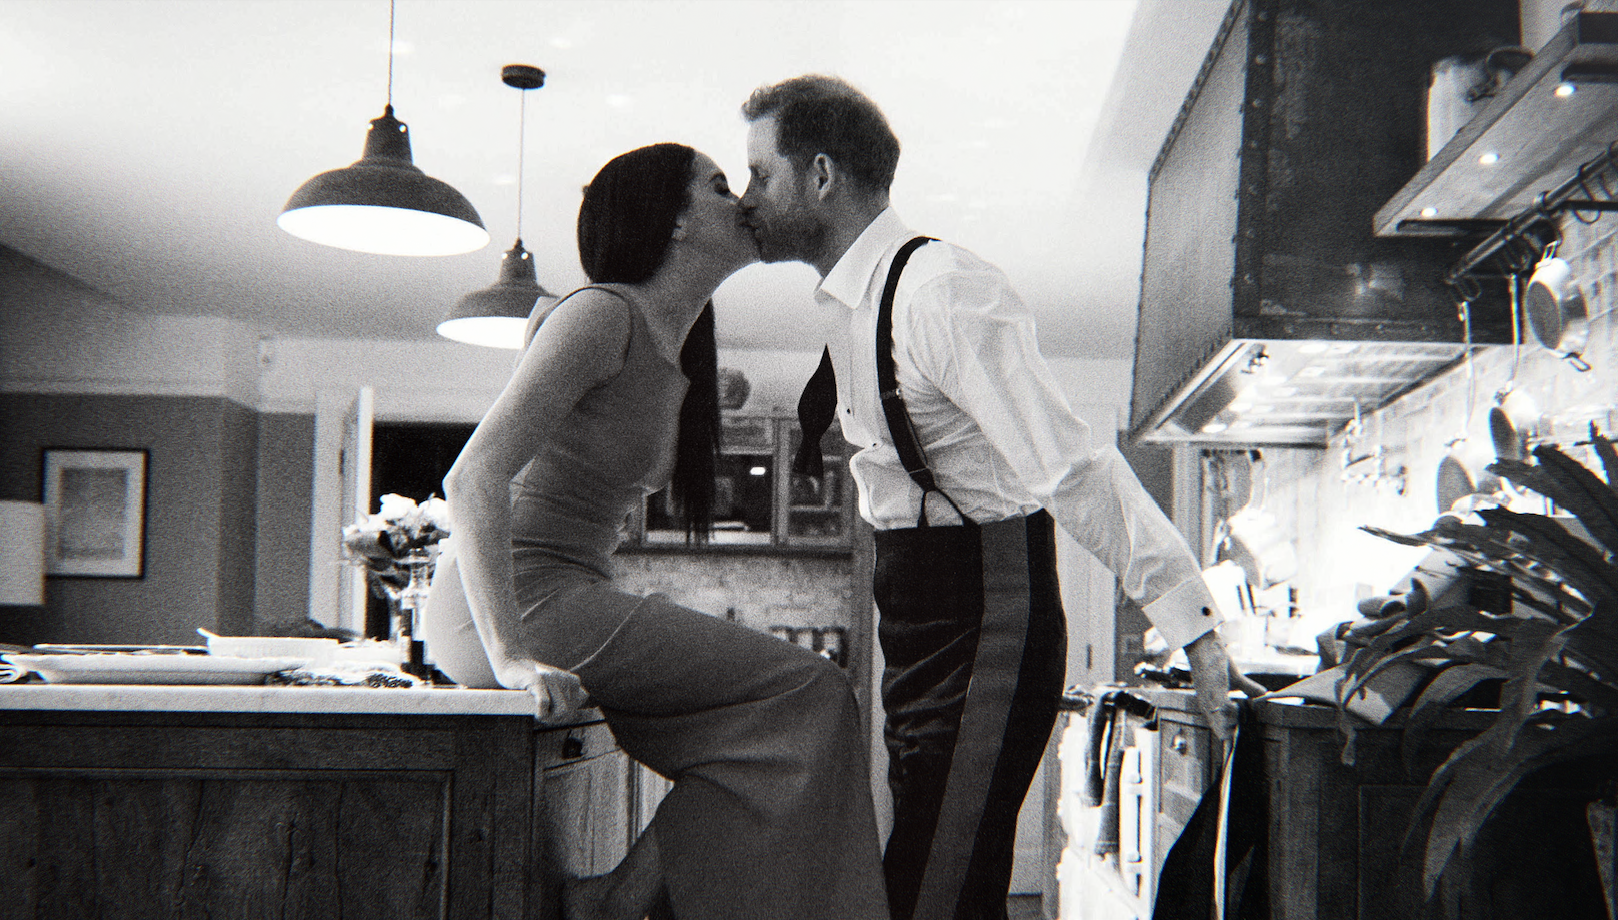 prince harry and meghan markle kissing in their kitchen